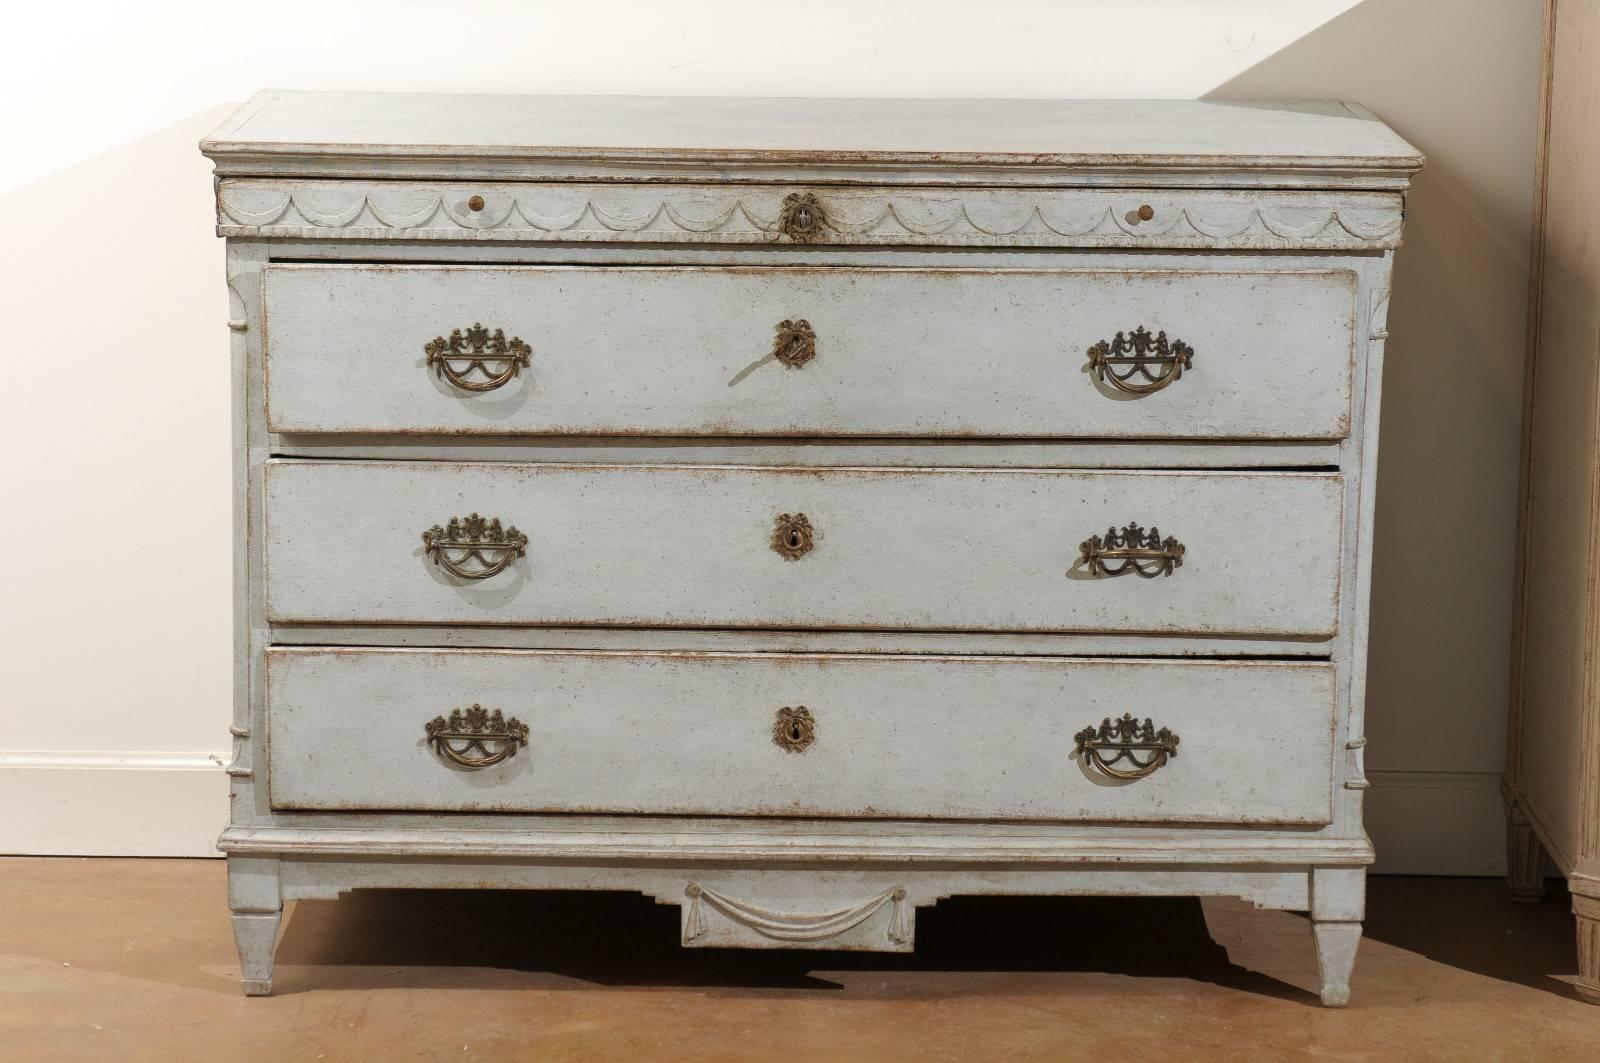 A Swedish Neoclassical painted commode from the early 19th century with original paint and hardware. This Swedish painted commode features a rectangular top sitting above a small upper drawer and three larger ones placed below. Painted in its